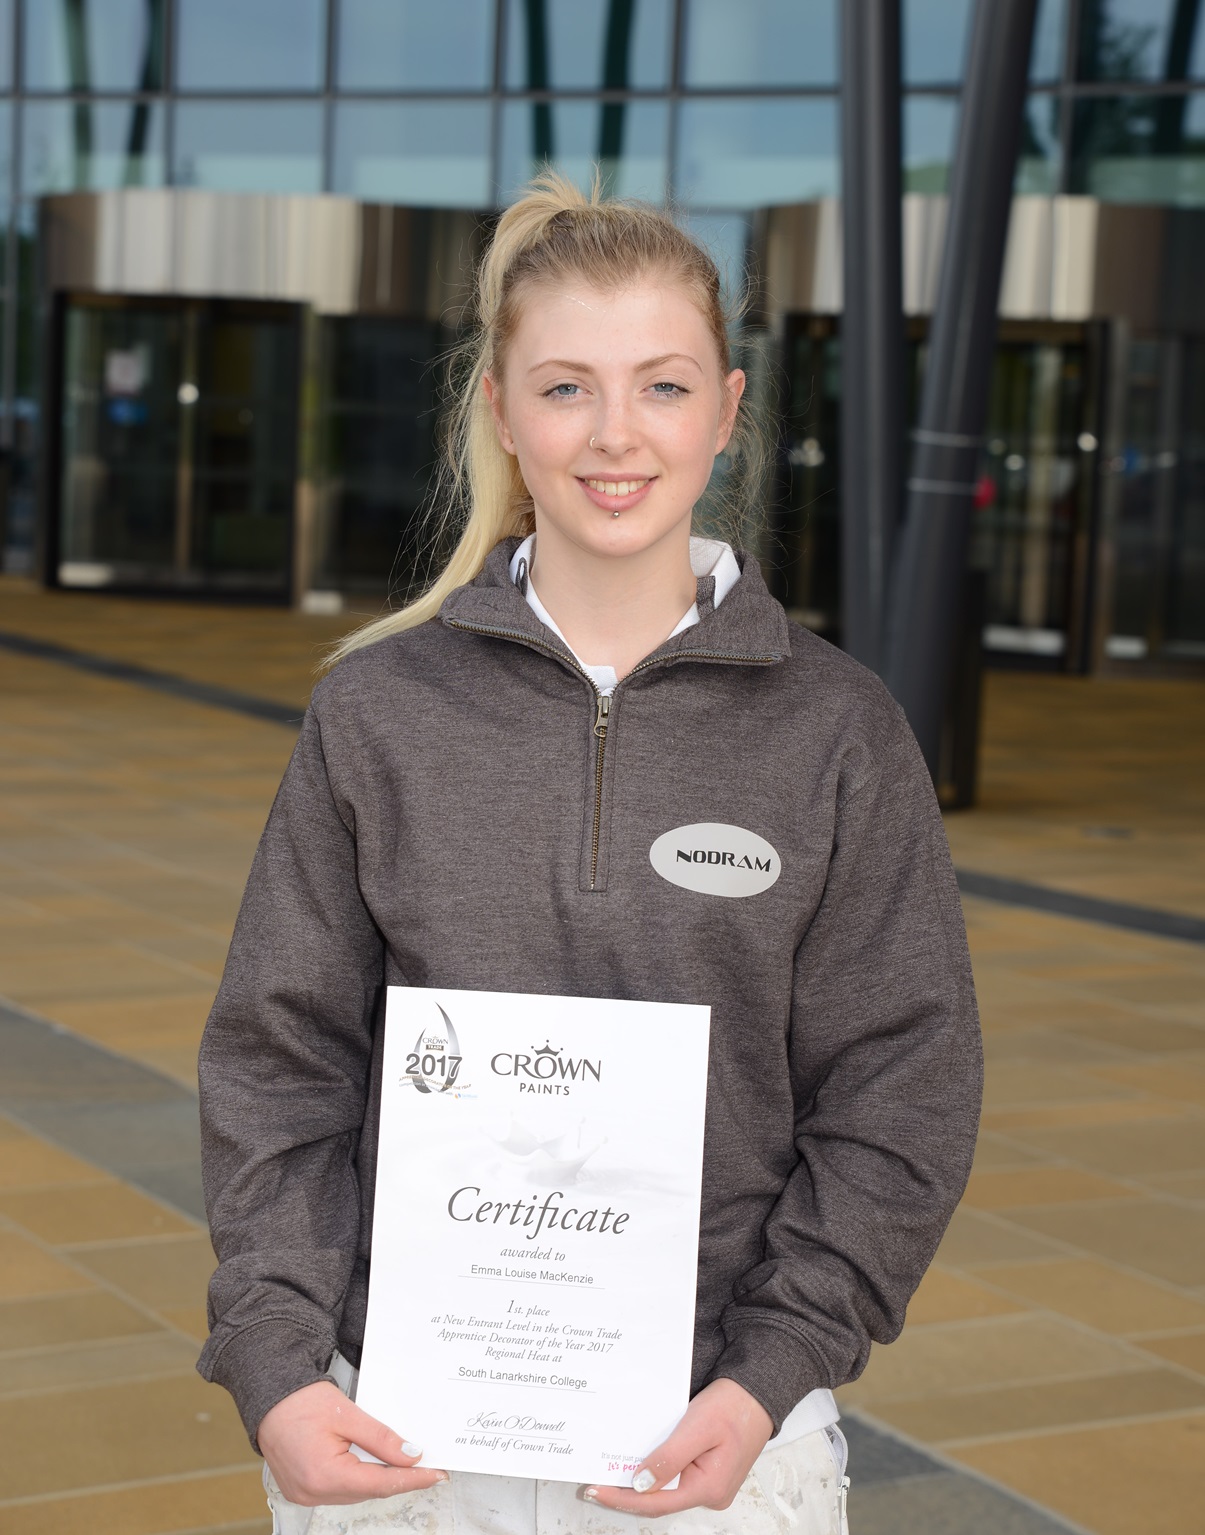 Inverness apprentice scoops top prize at leading industry awards